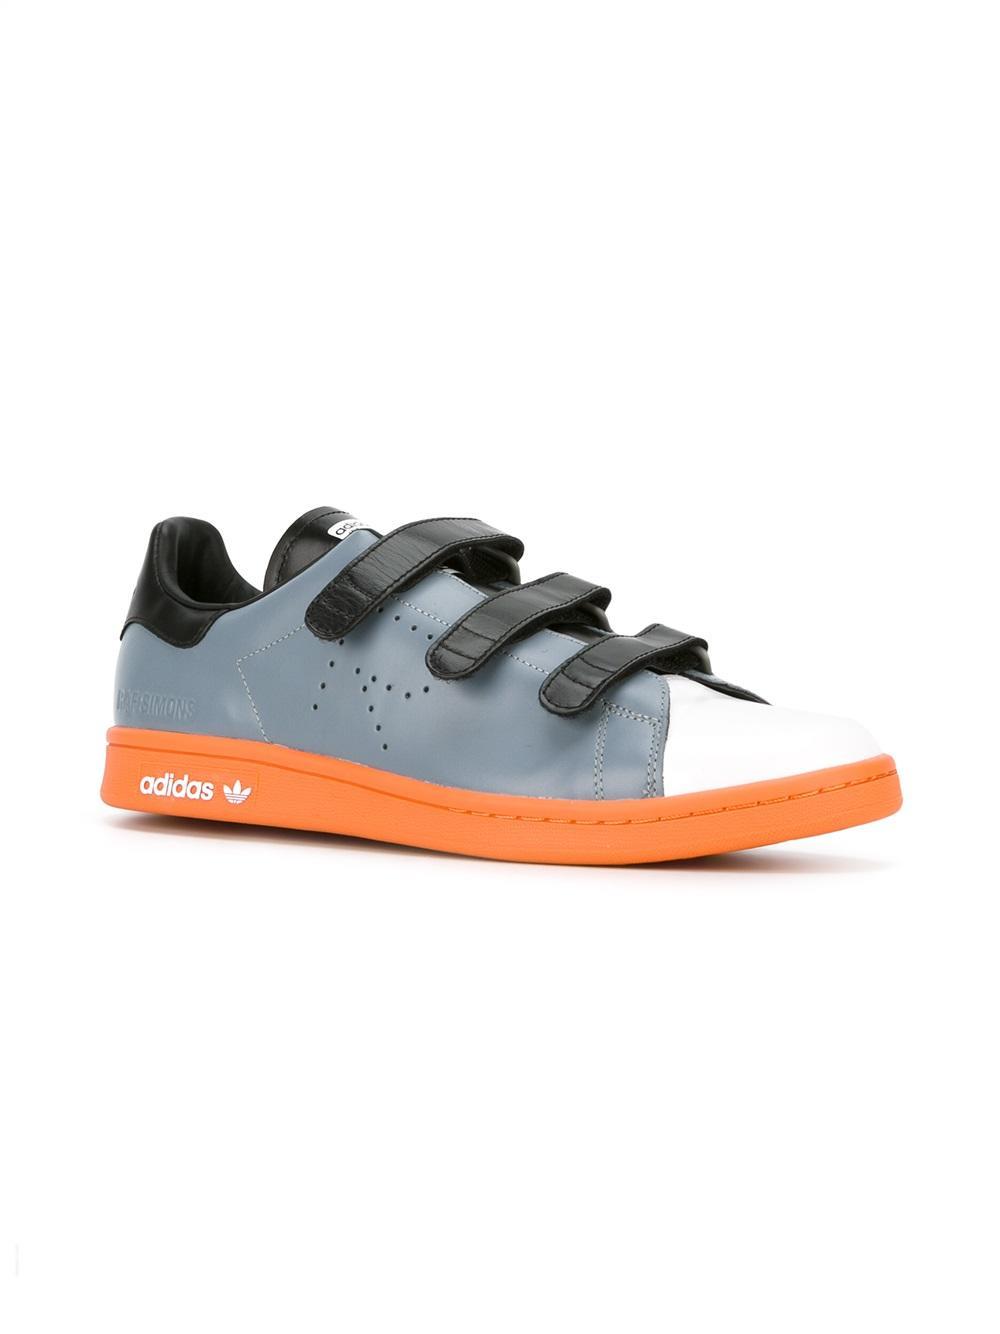 adidas By Raf Leather Velcro Straps Sneakers in Grey (Gray) -